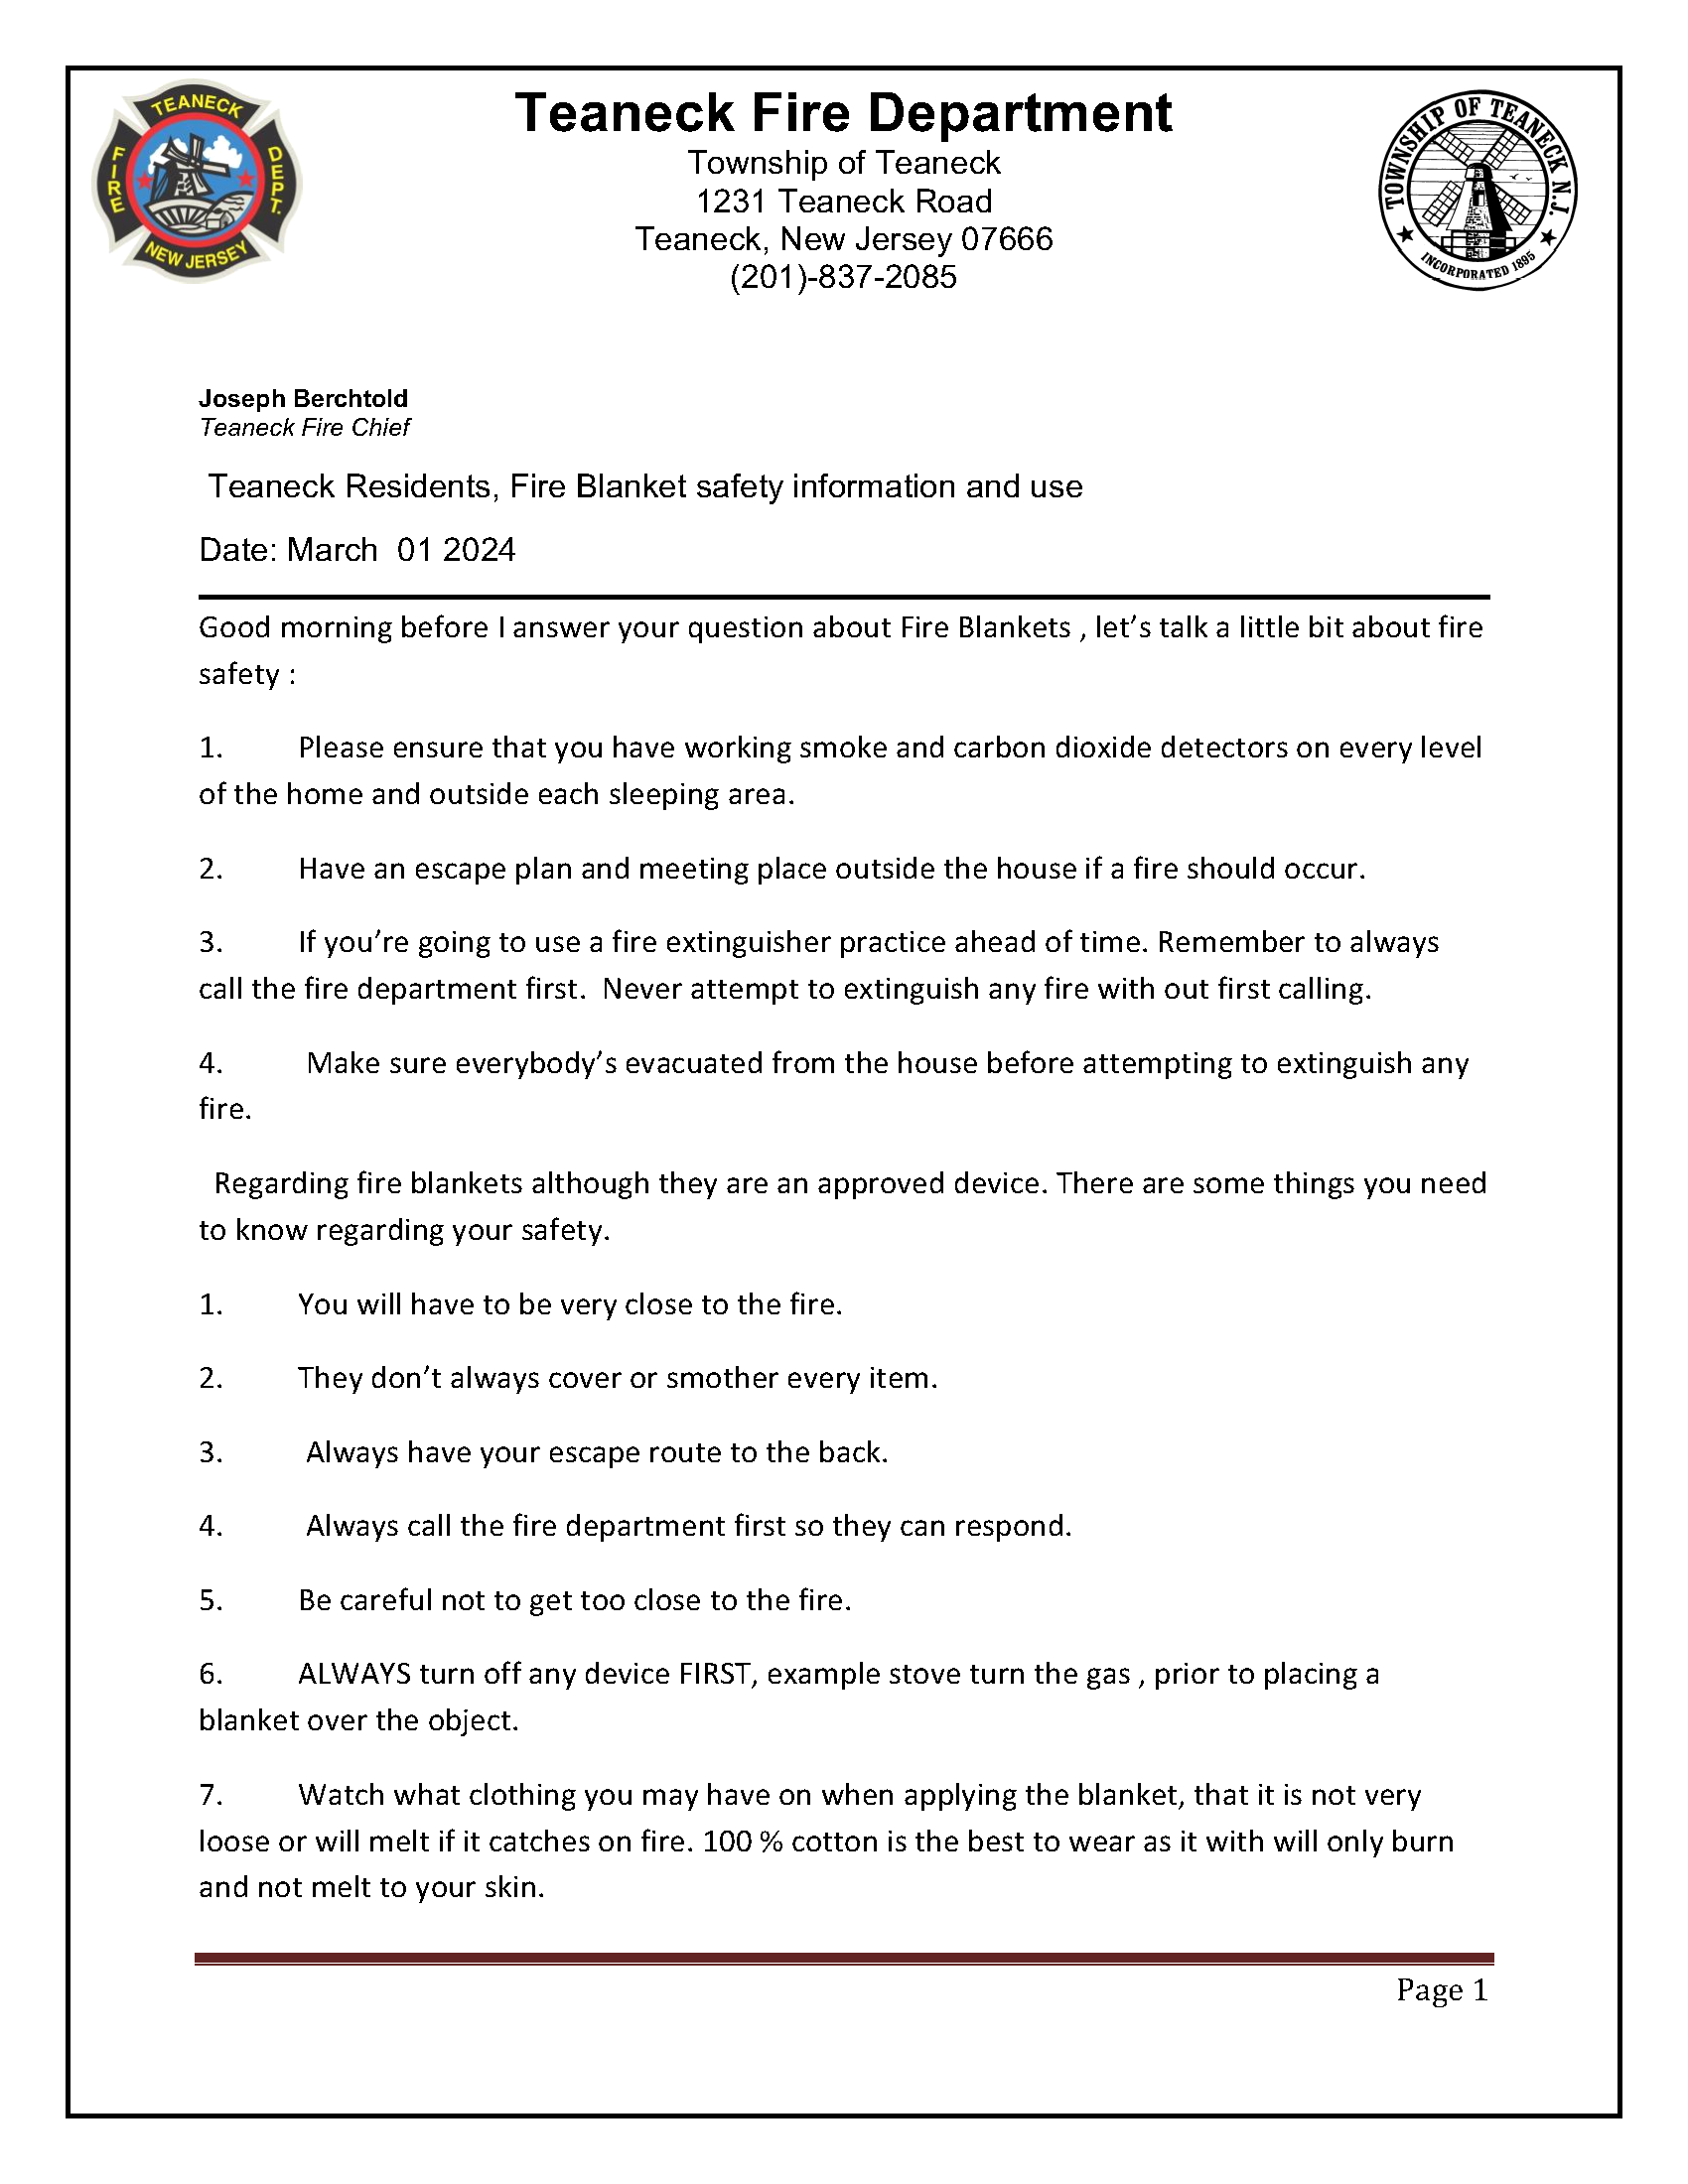 An image of the attached PDF with information on fire blankets